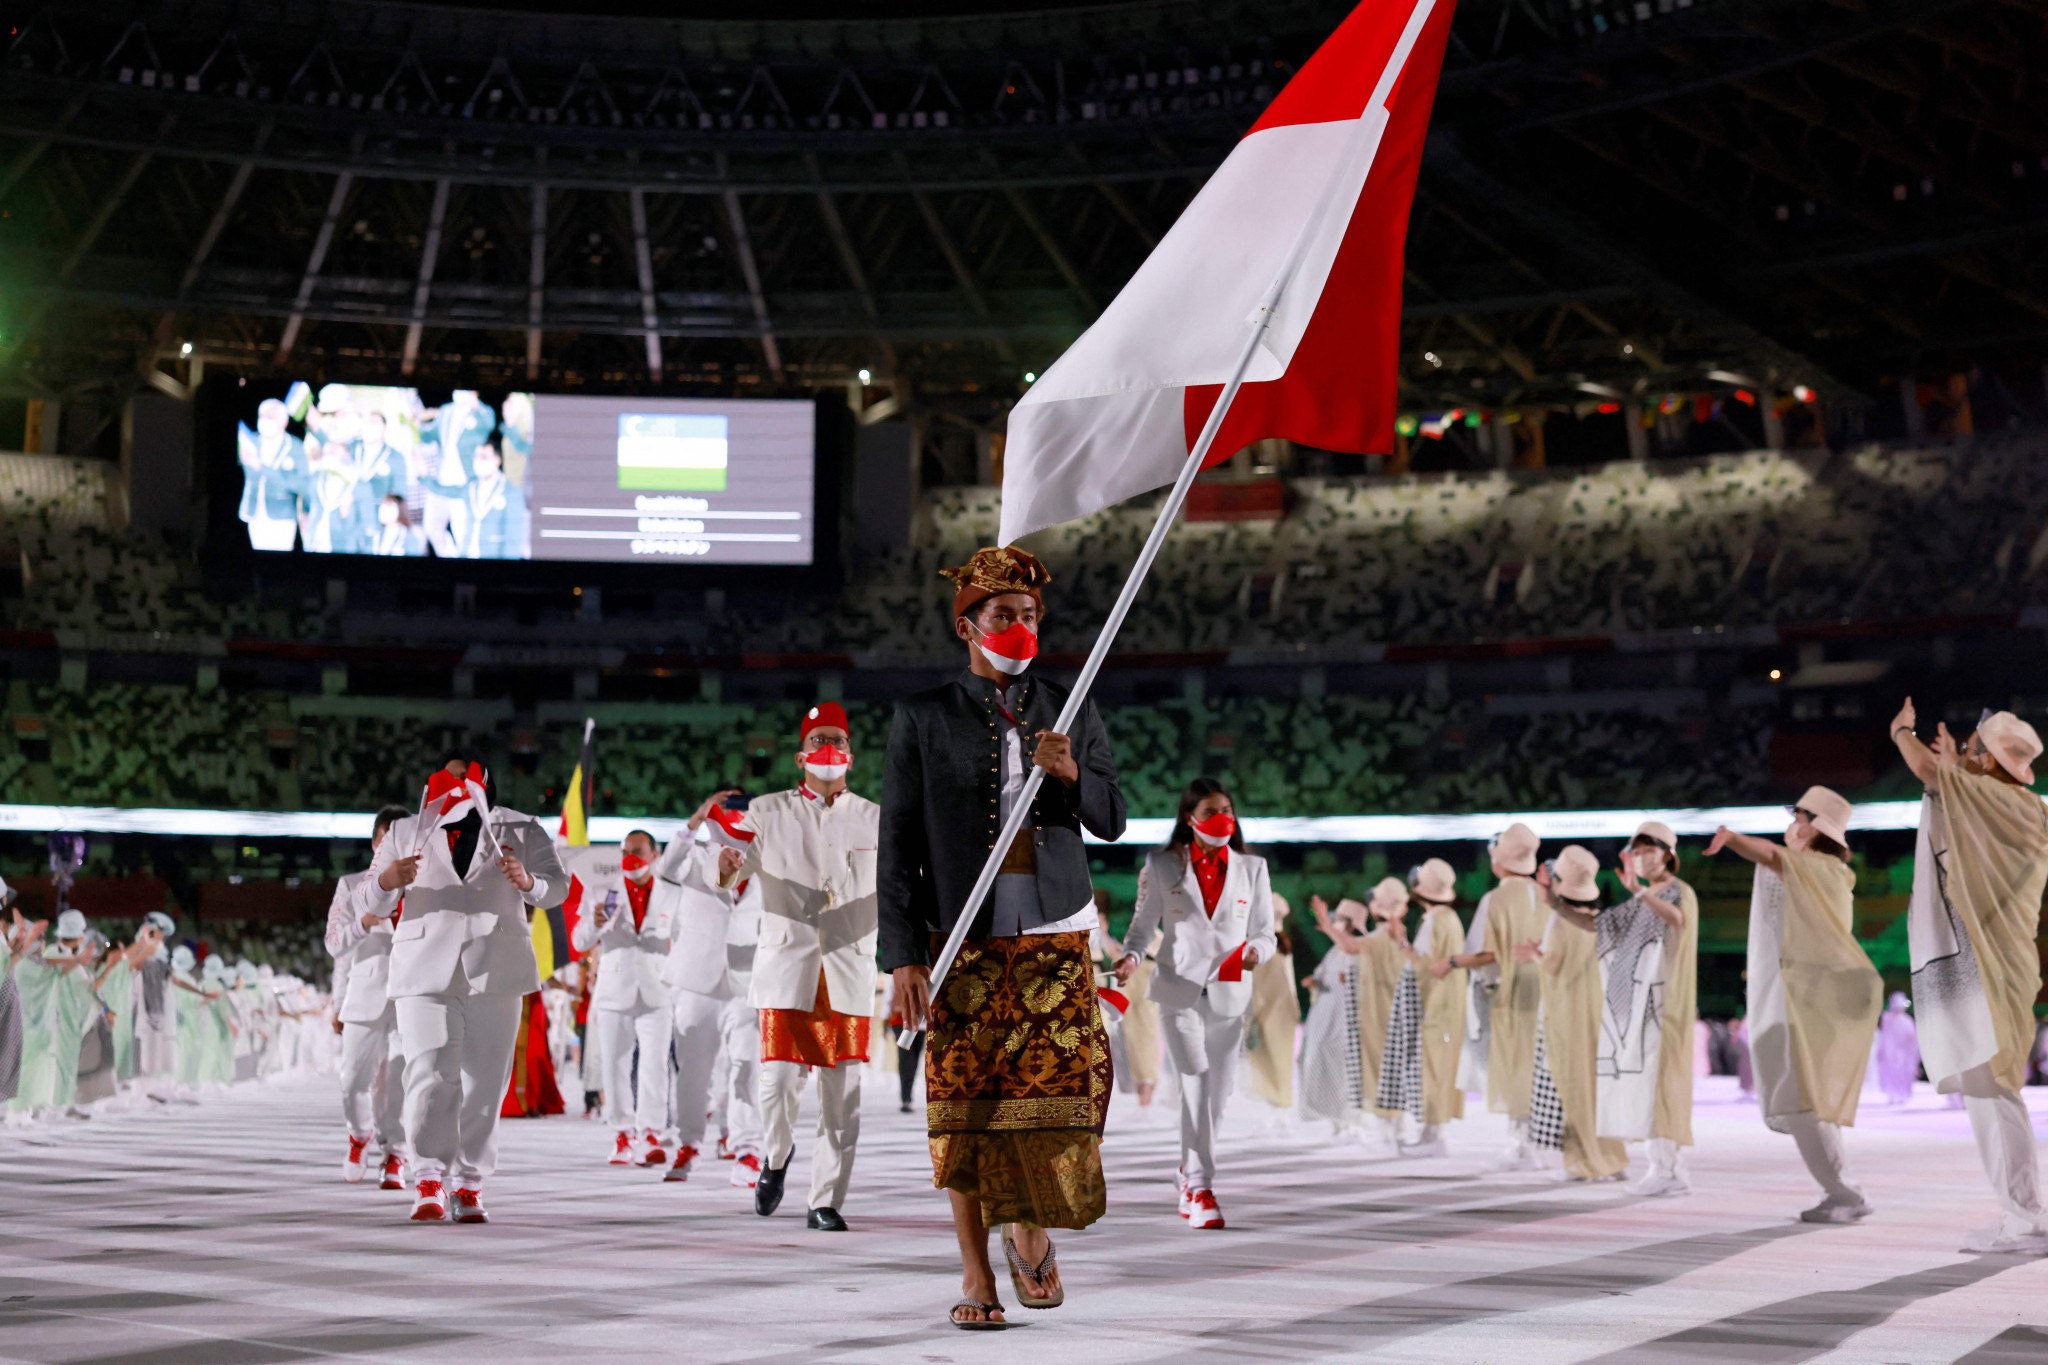 Indonesia won one gold, one silver and three bronzes at the Tokyo 2020 Olympics ©Getty Images